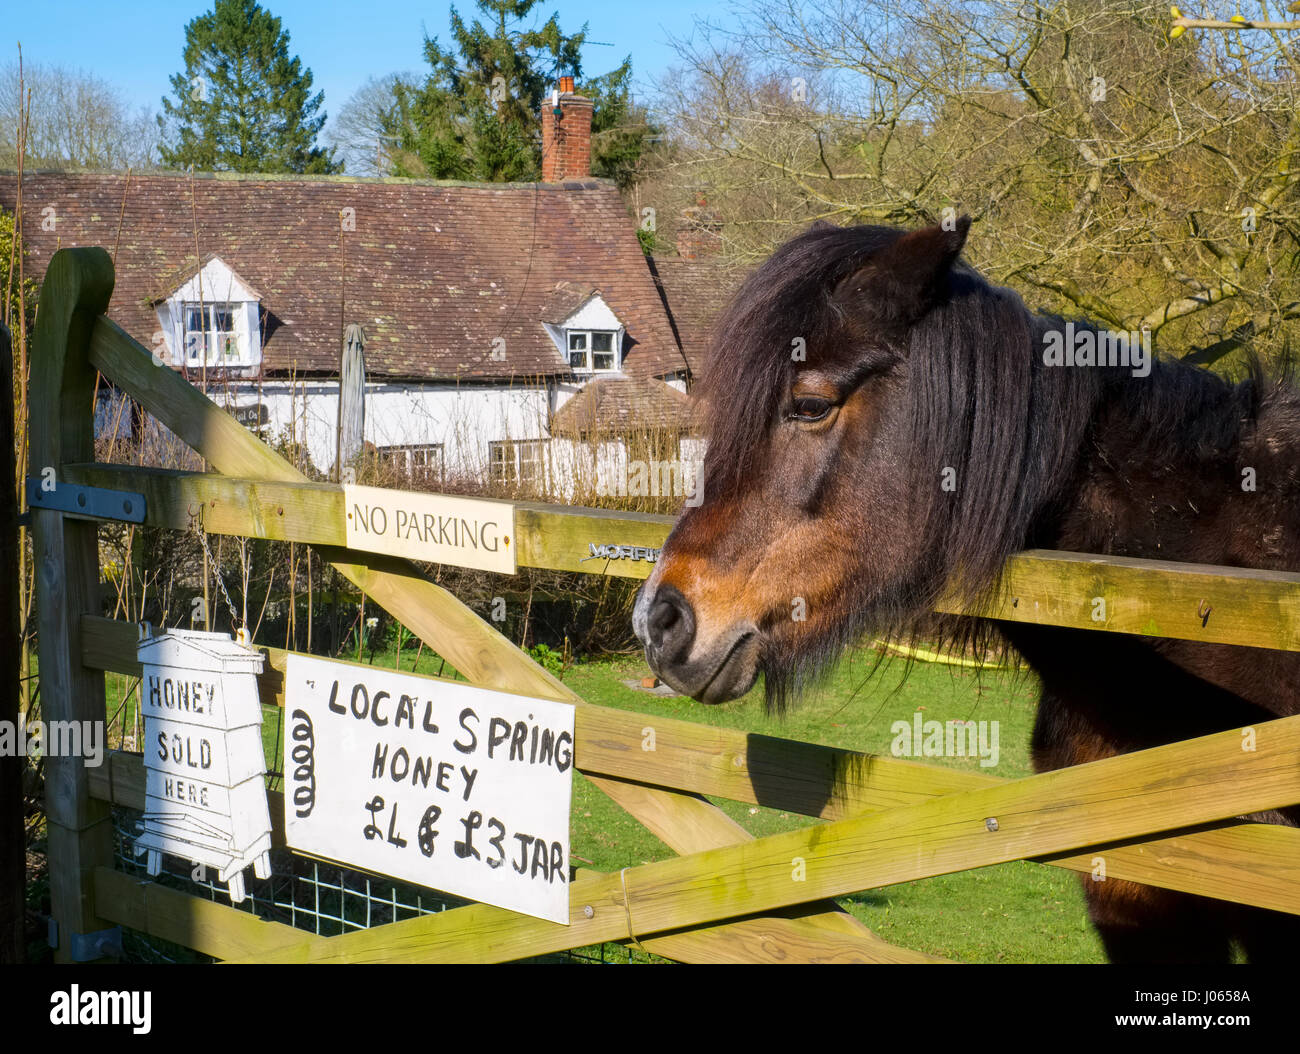 A pony looking over a gate with local honey for sale sign in the village of Cardington, Shropshire, England, UK Stock Photo